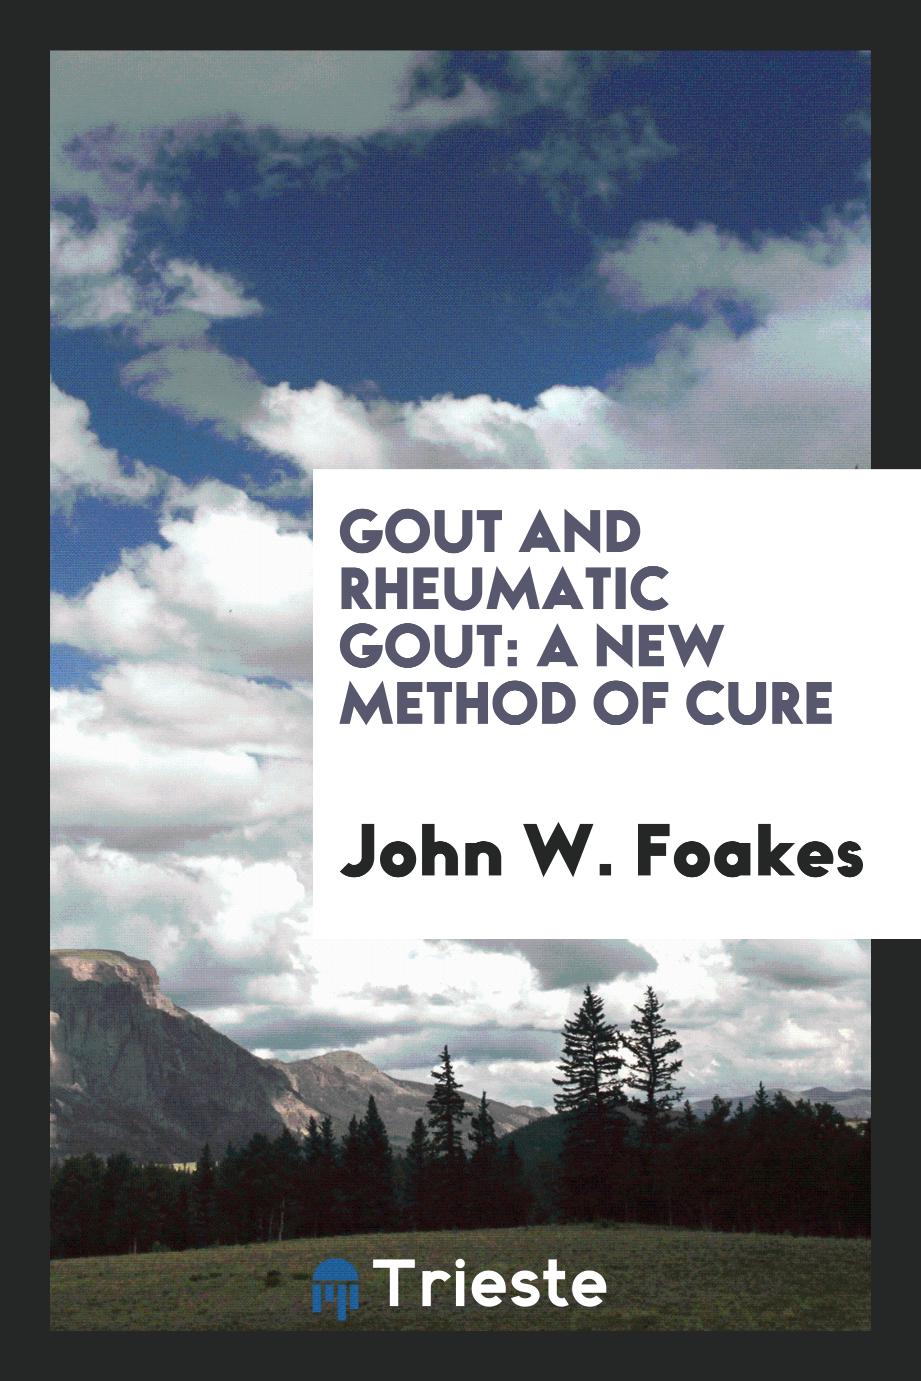 Gout and Rheumatic Gout: A New Method of Cure